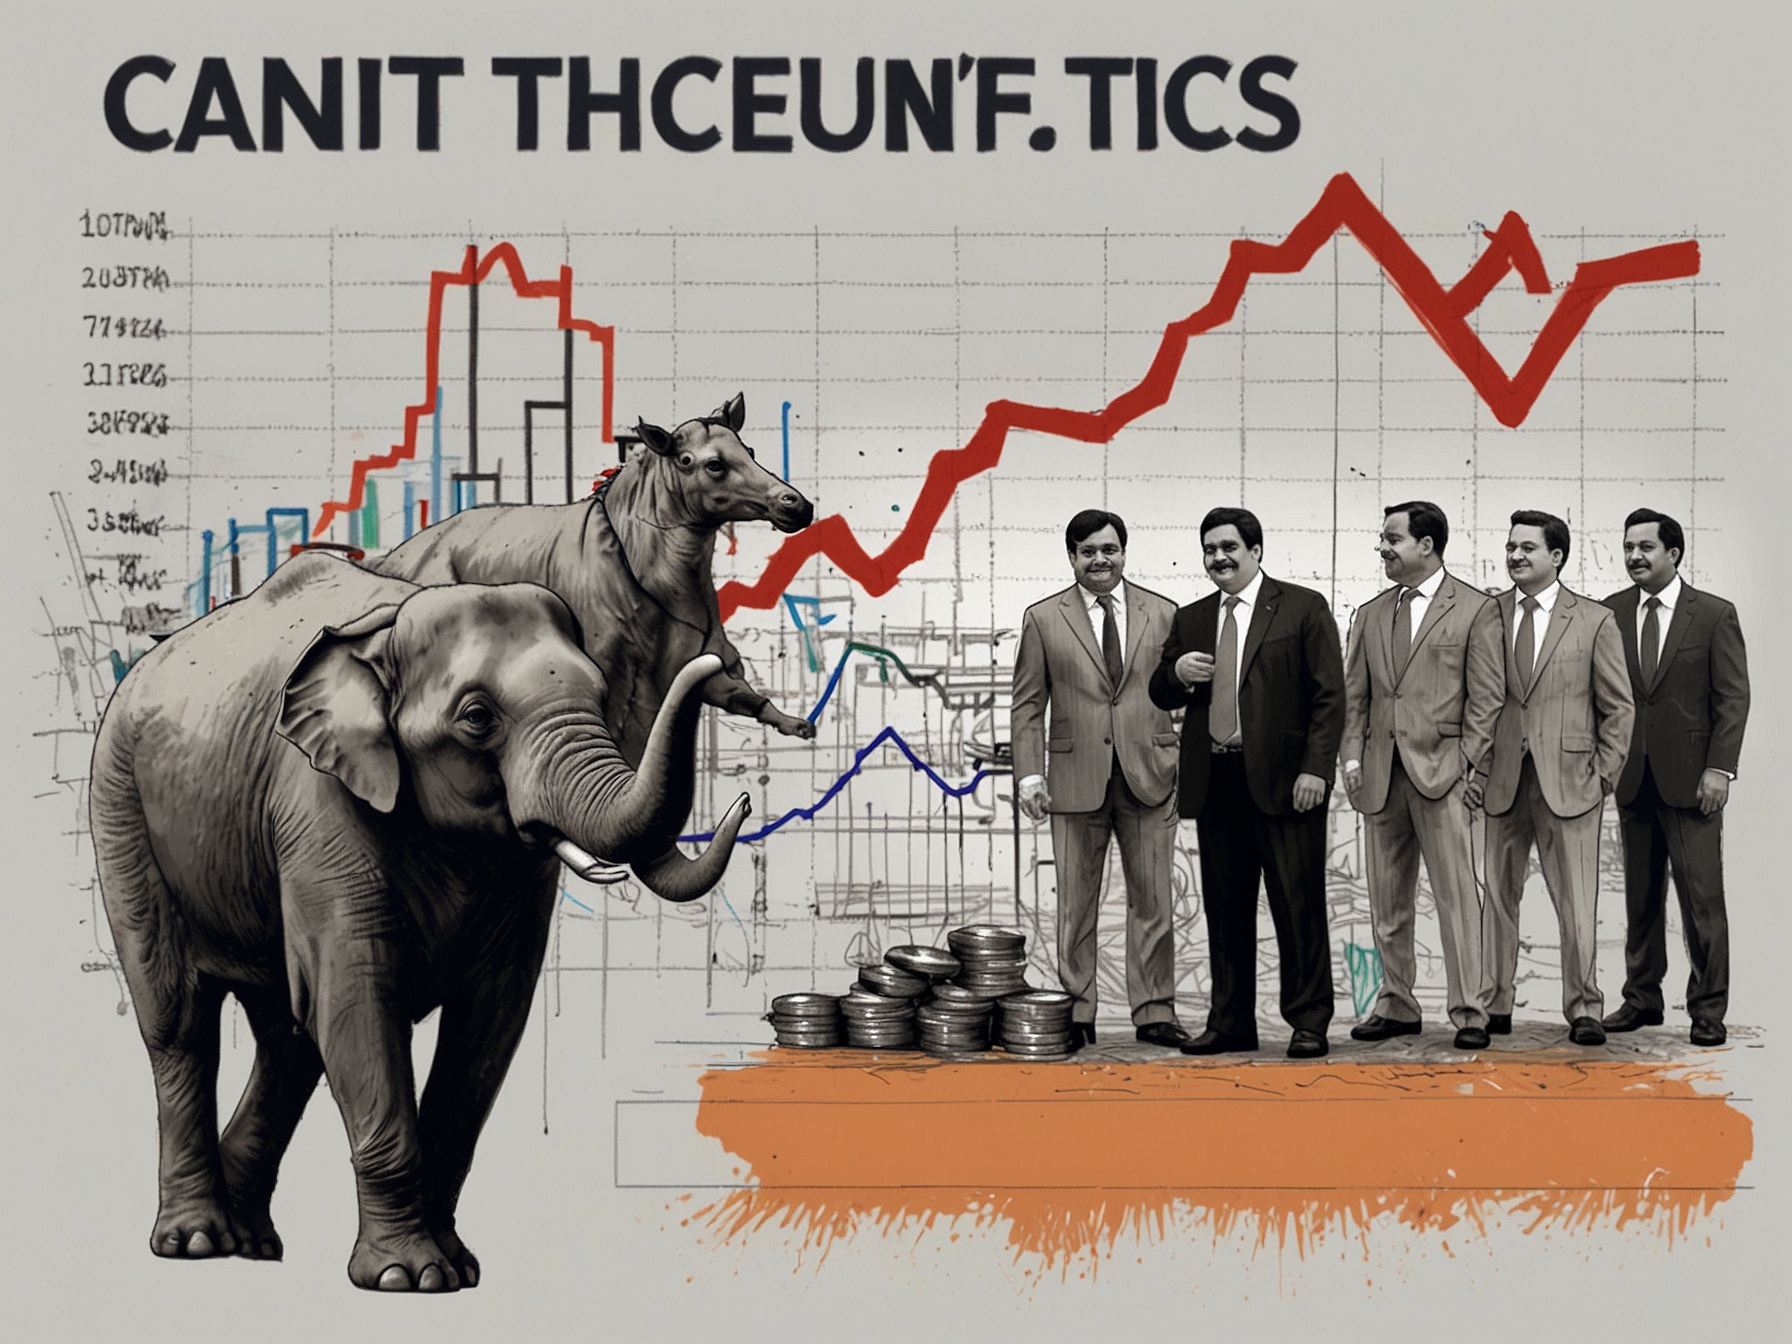 Representation of key stocks TCS and Adani Enterprises performing well in the market, with icons of economic data and global indices supporting investor confidence.